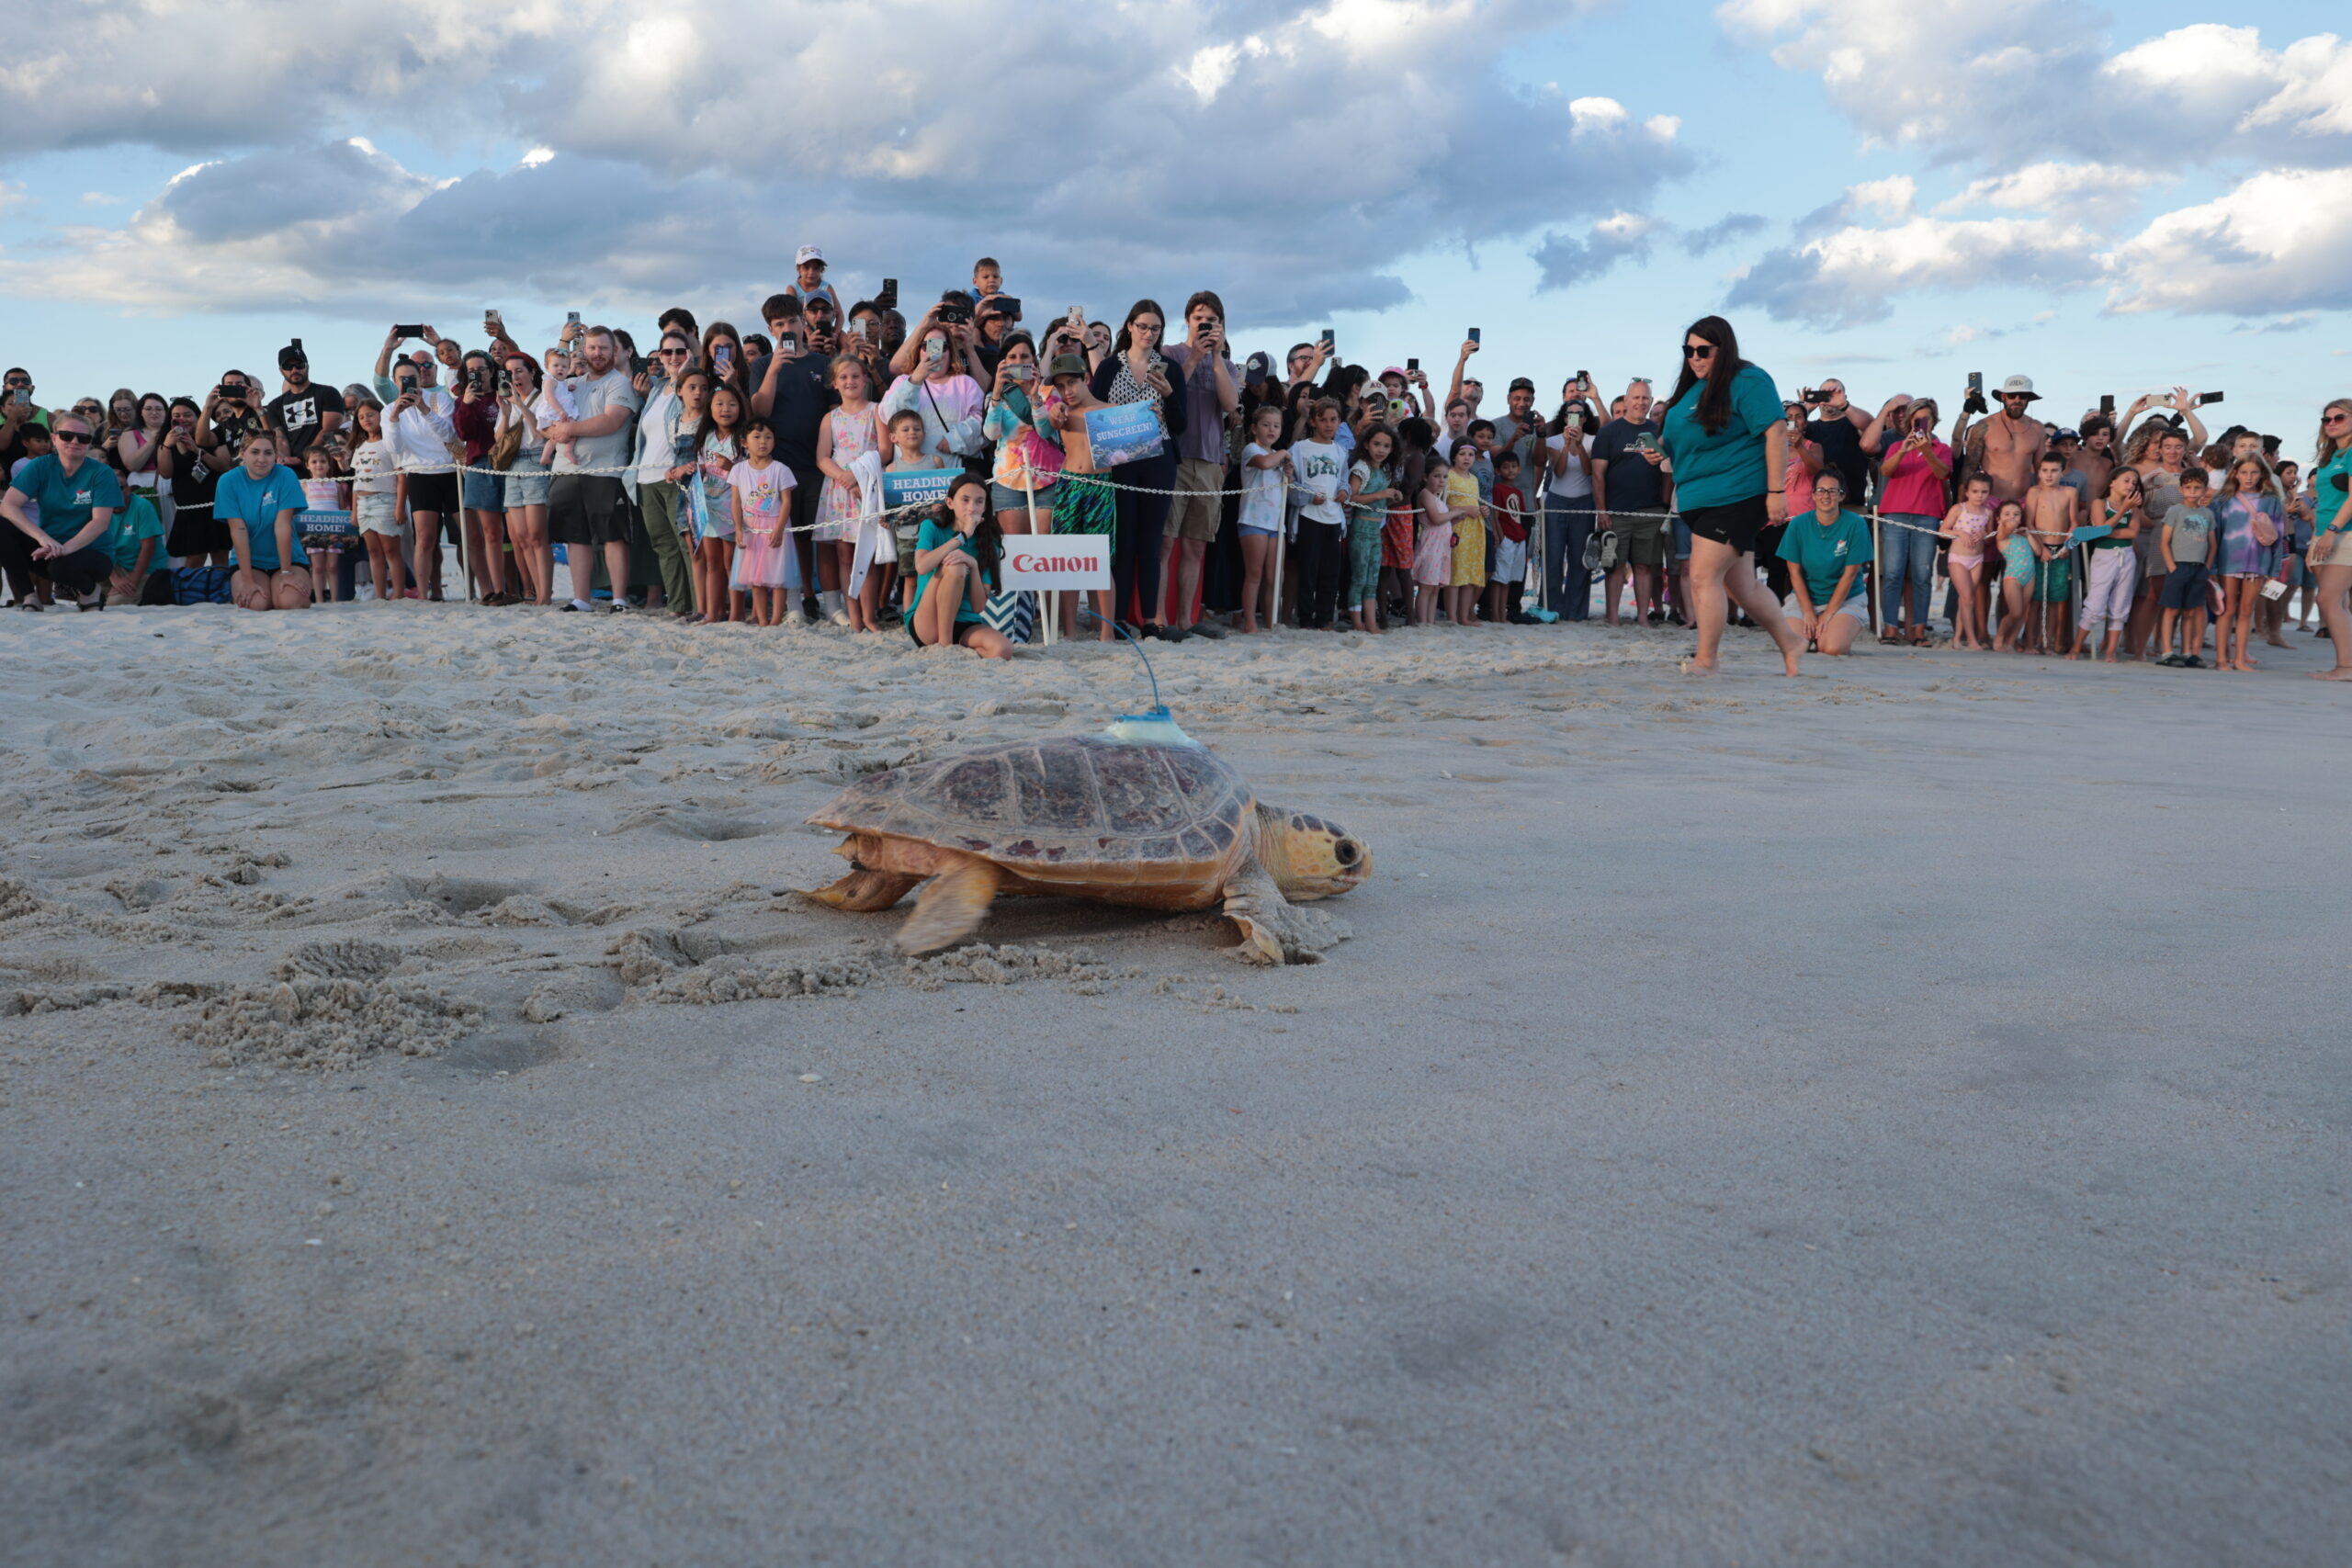 Canon U.S.A. Supports the New York Marine Rescue Center Cold Stunned Turtle Program